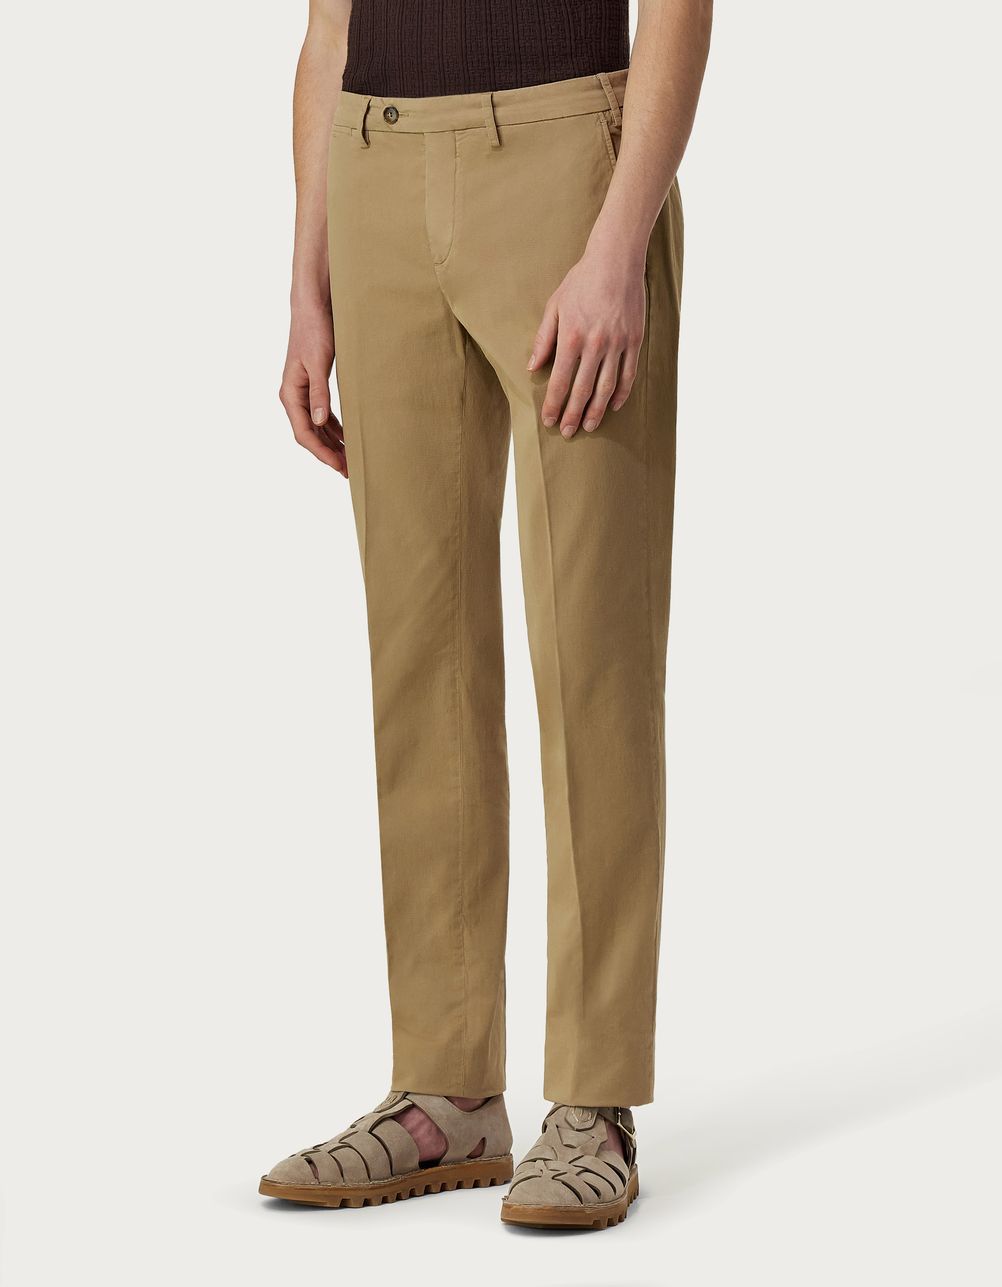 Chino pants in beige garment-dyed cotton microtwill